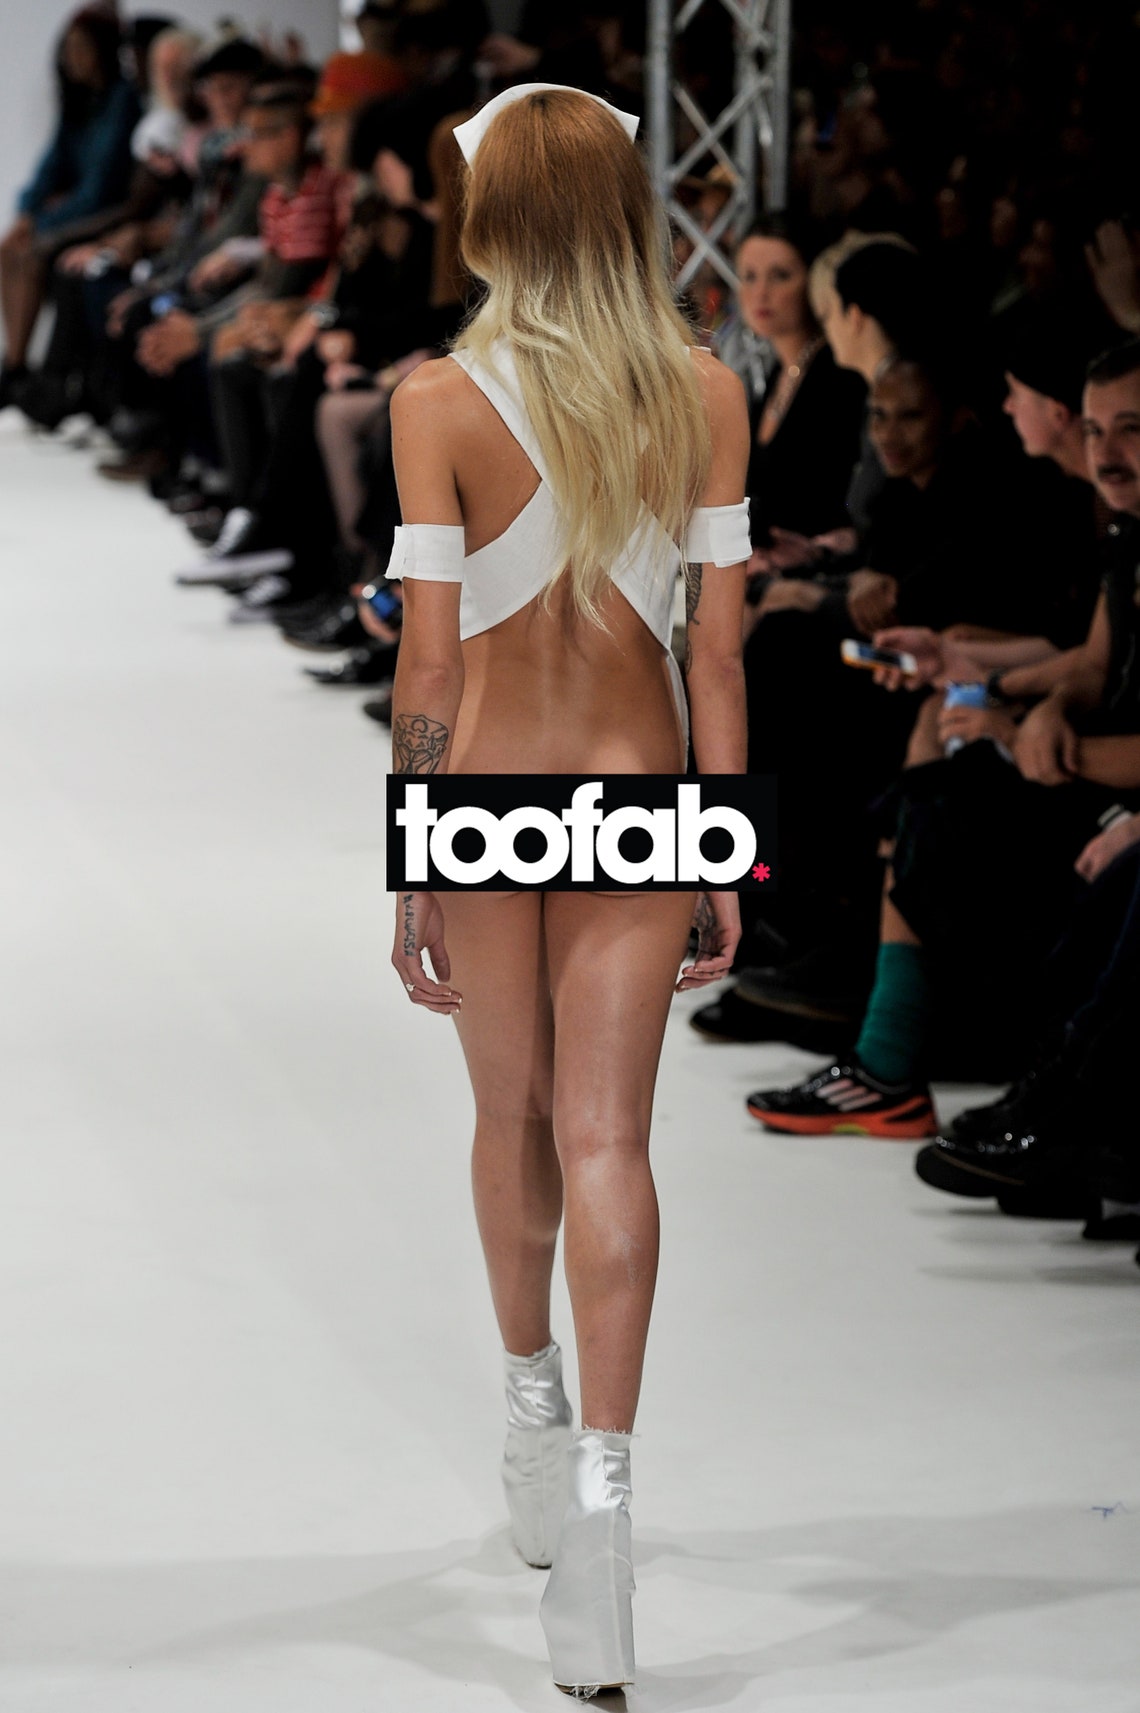 adriane hoff recommends bottomless fashion show pic